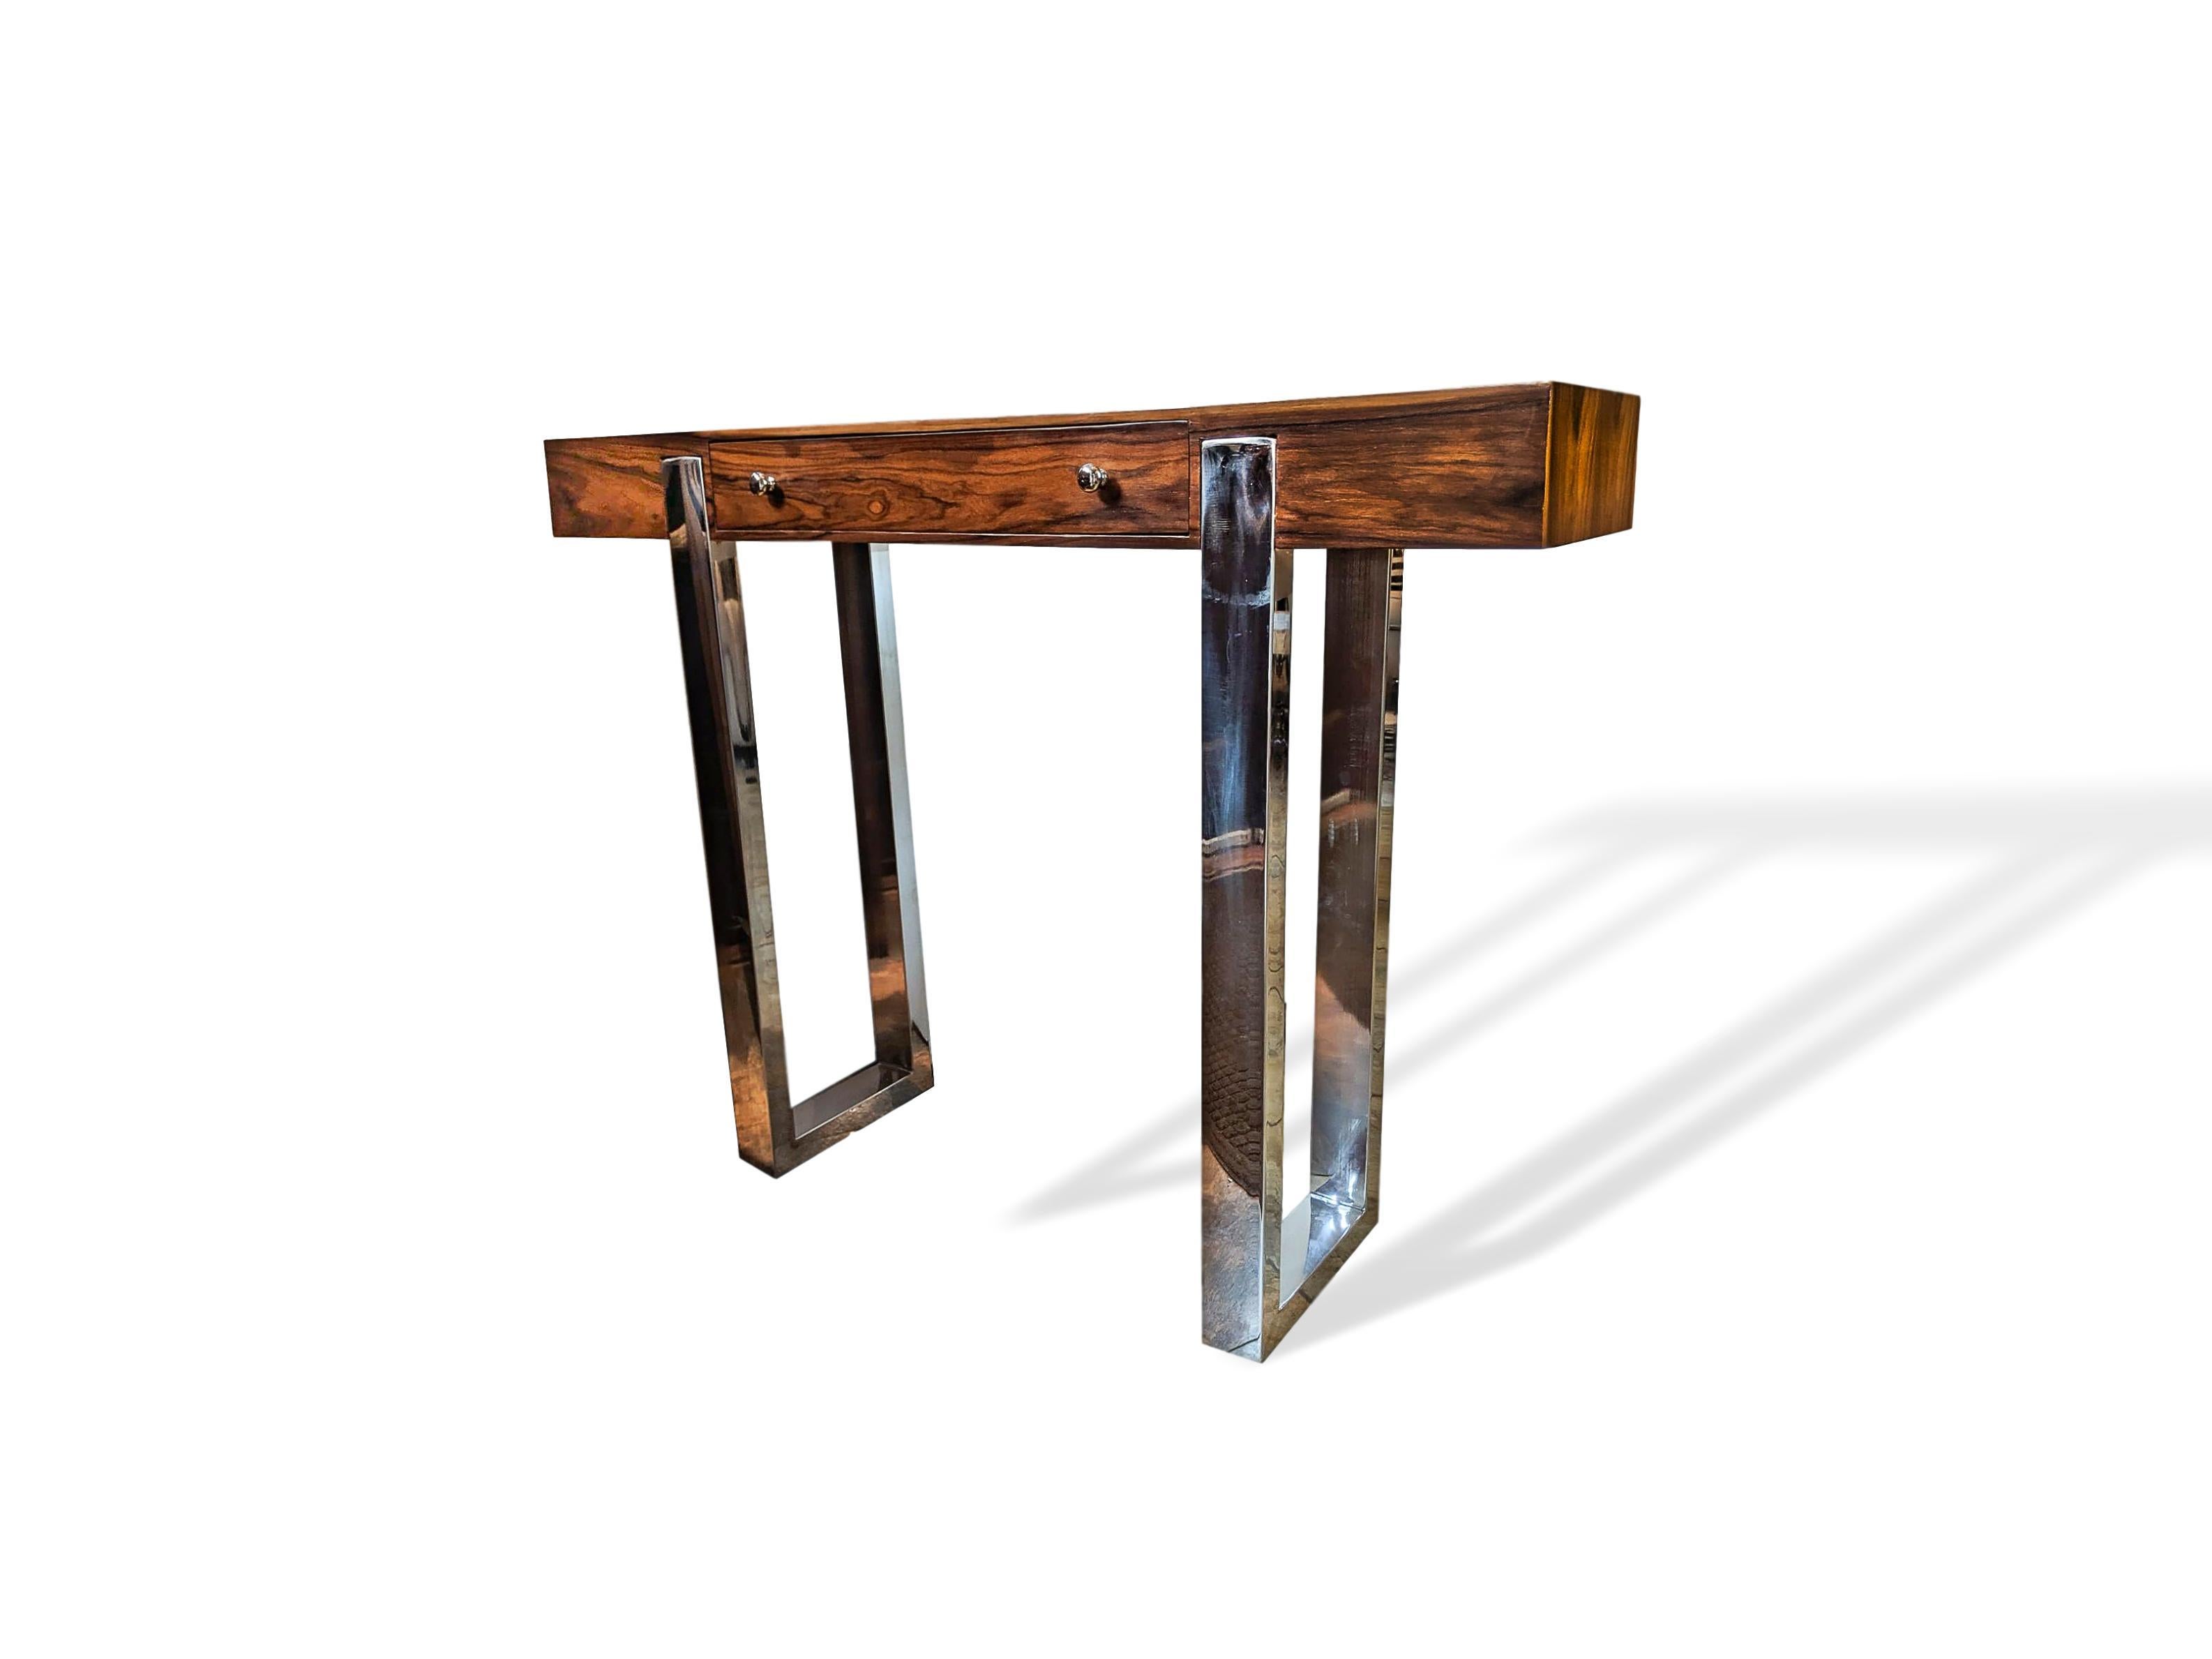 20th Century Pair of Mid-Century Modern Rosewood and Chrome Console Tables, Italian